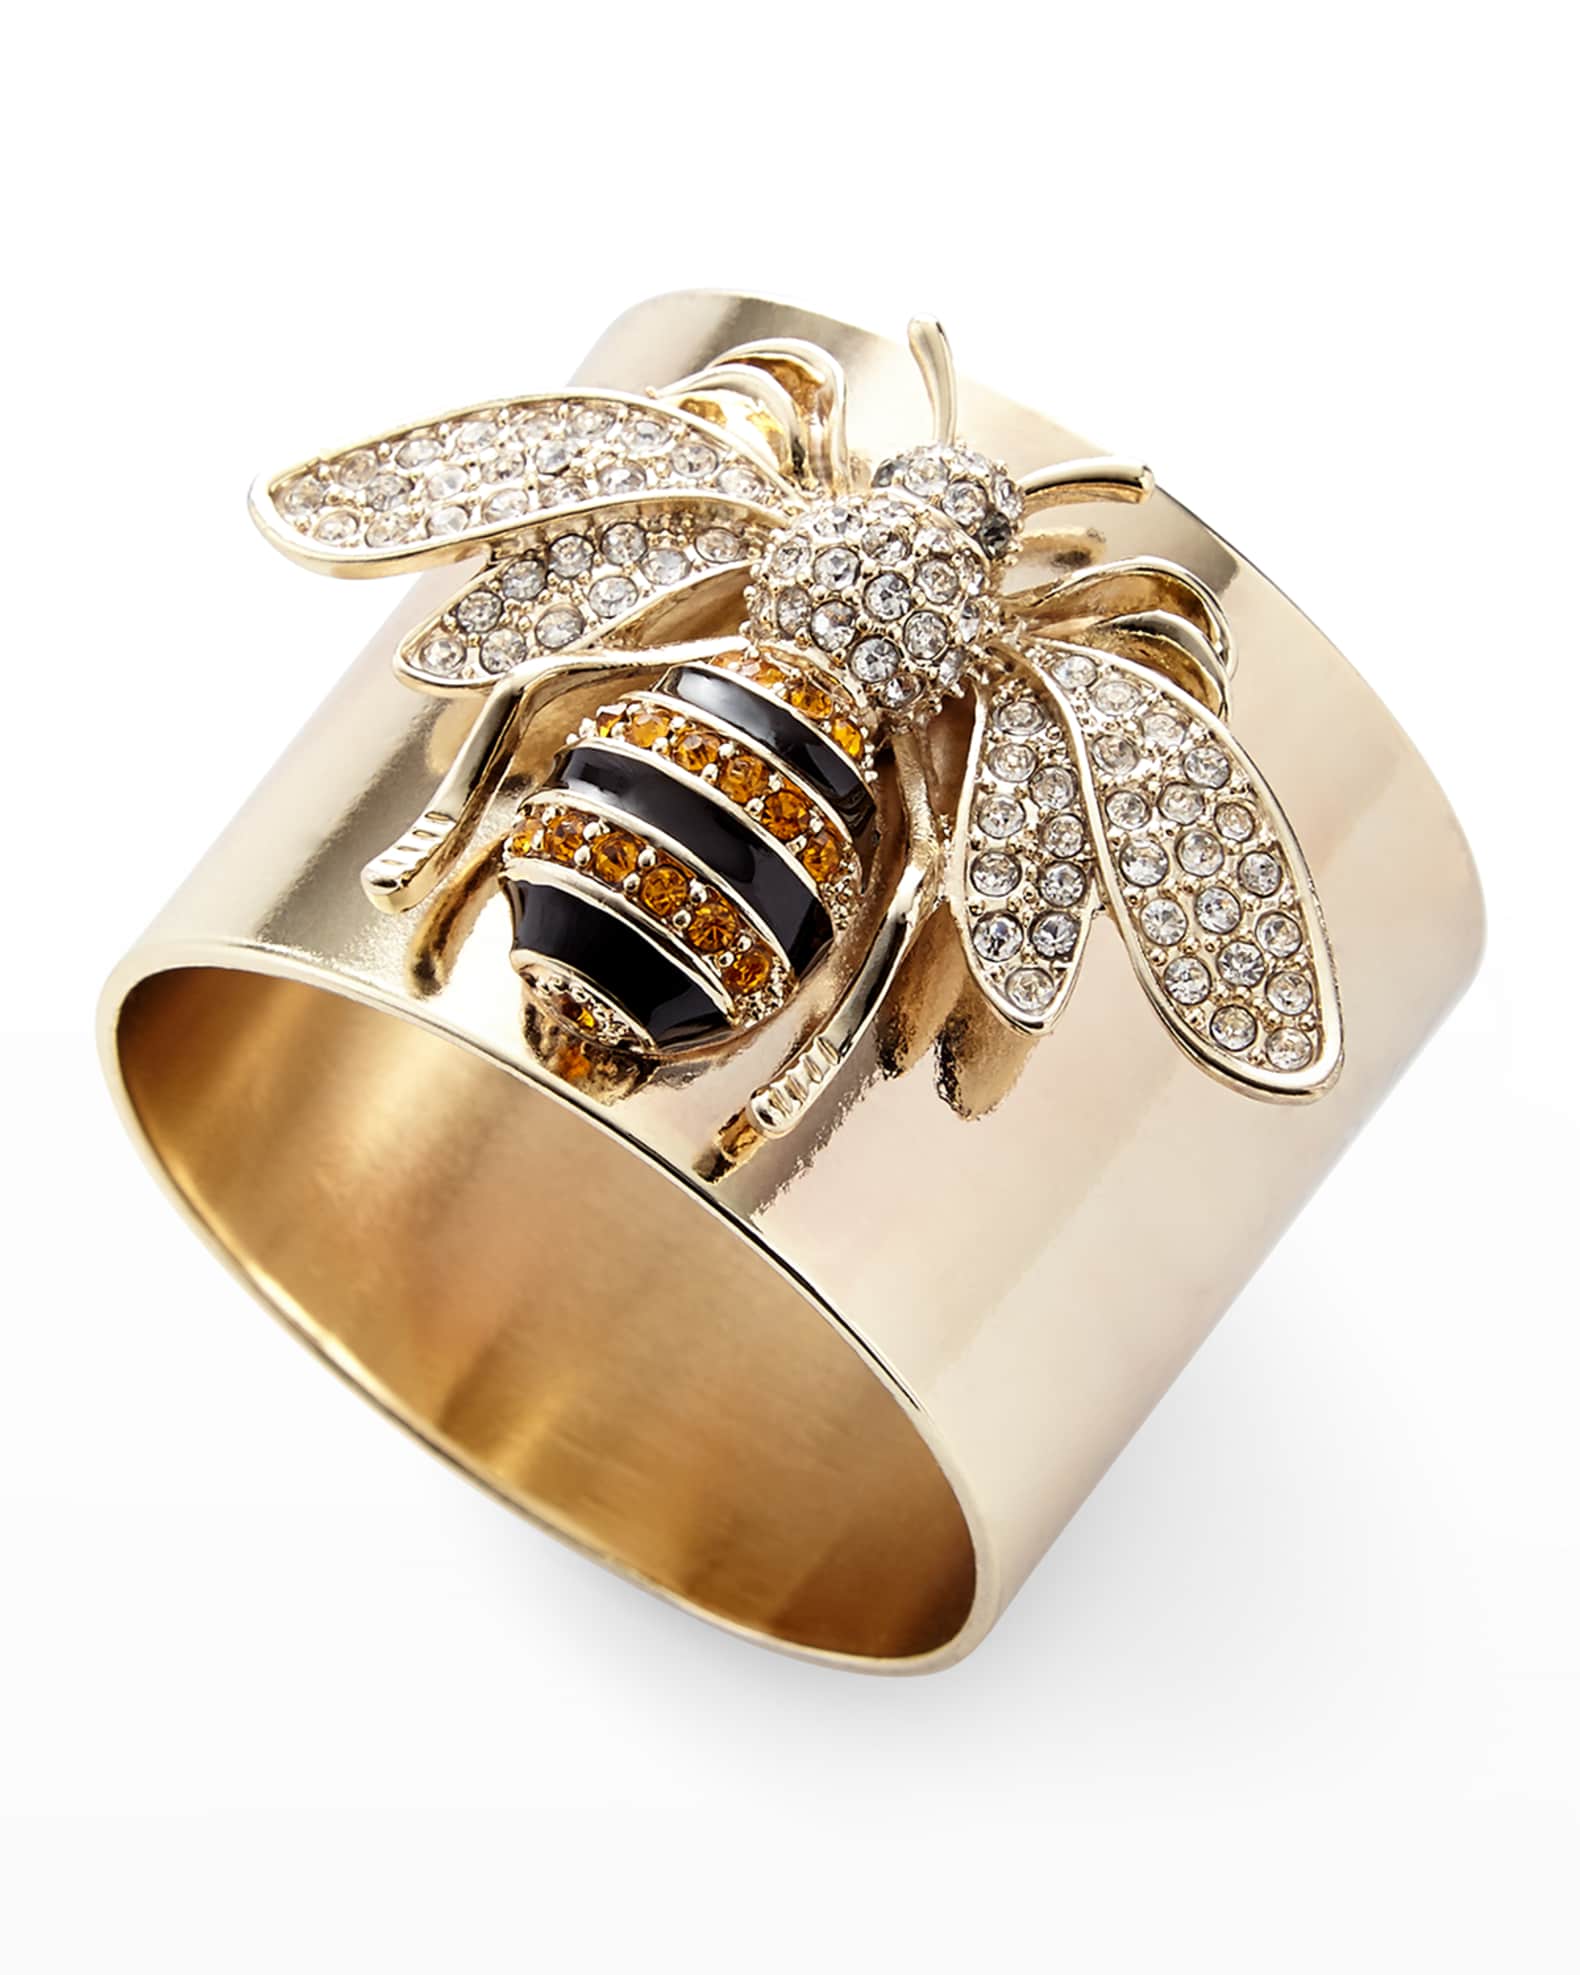 Striped Bee Napkin Rings, Set of 2 0